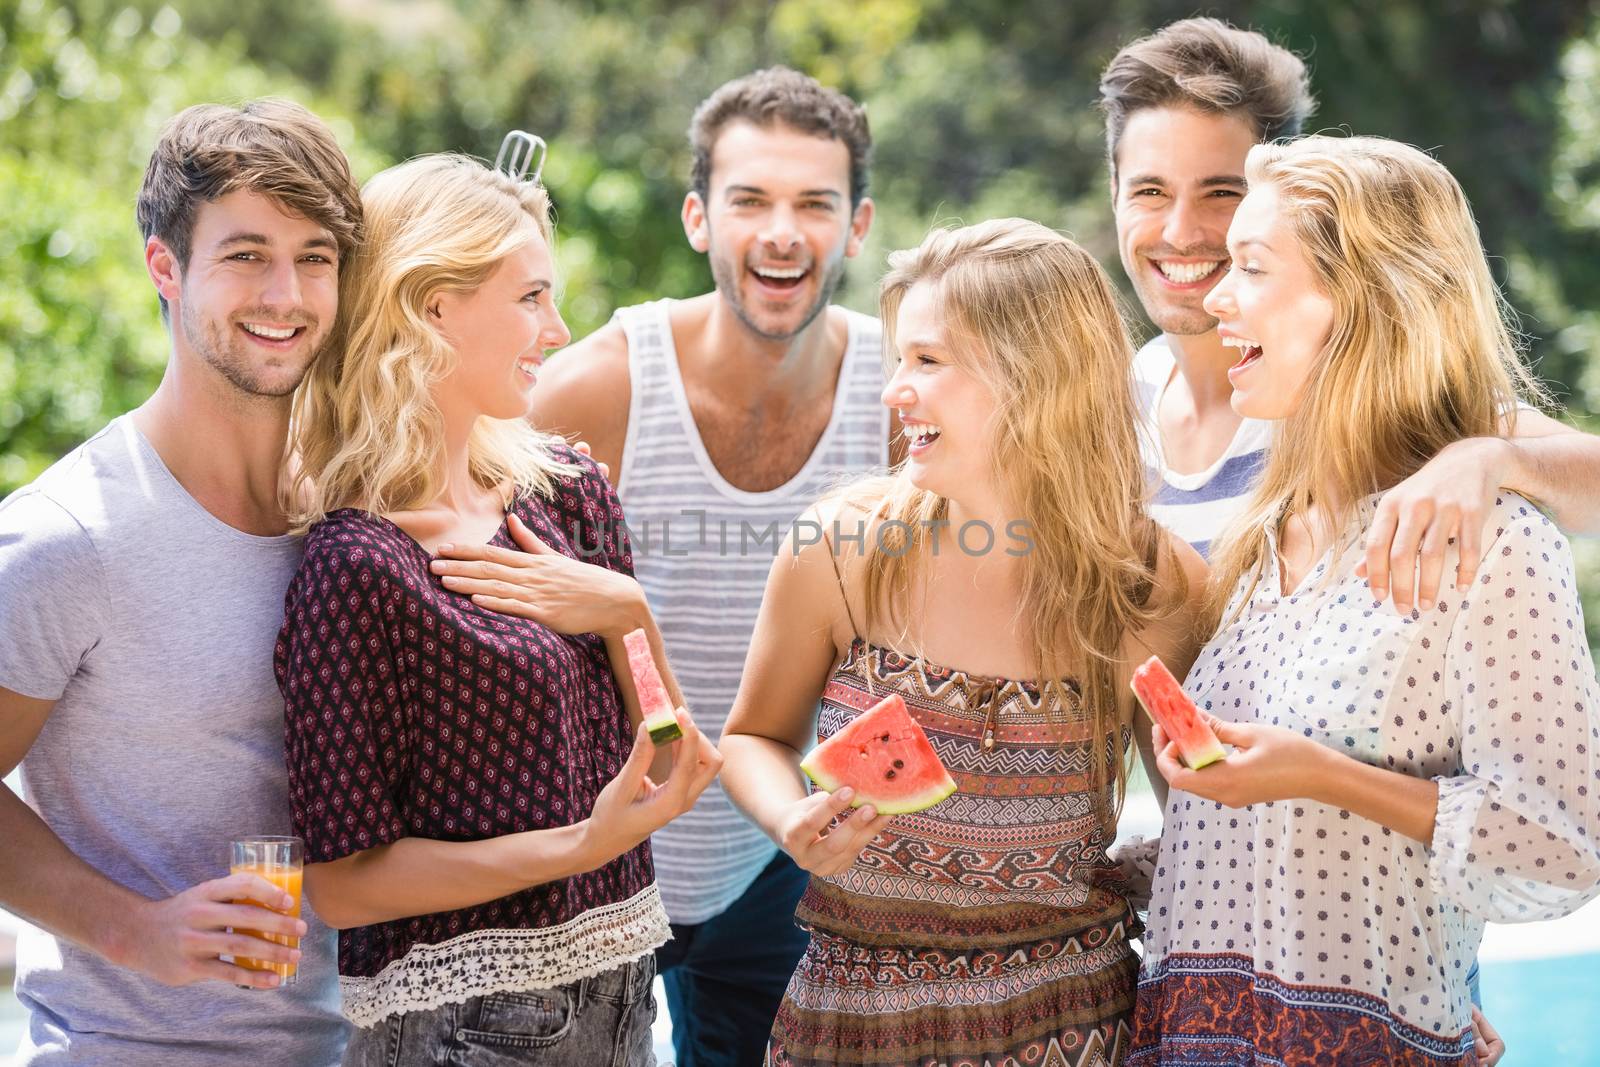 Group of friends having fun while eating a slice of water melon